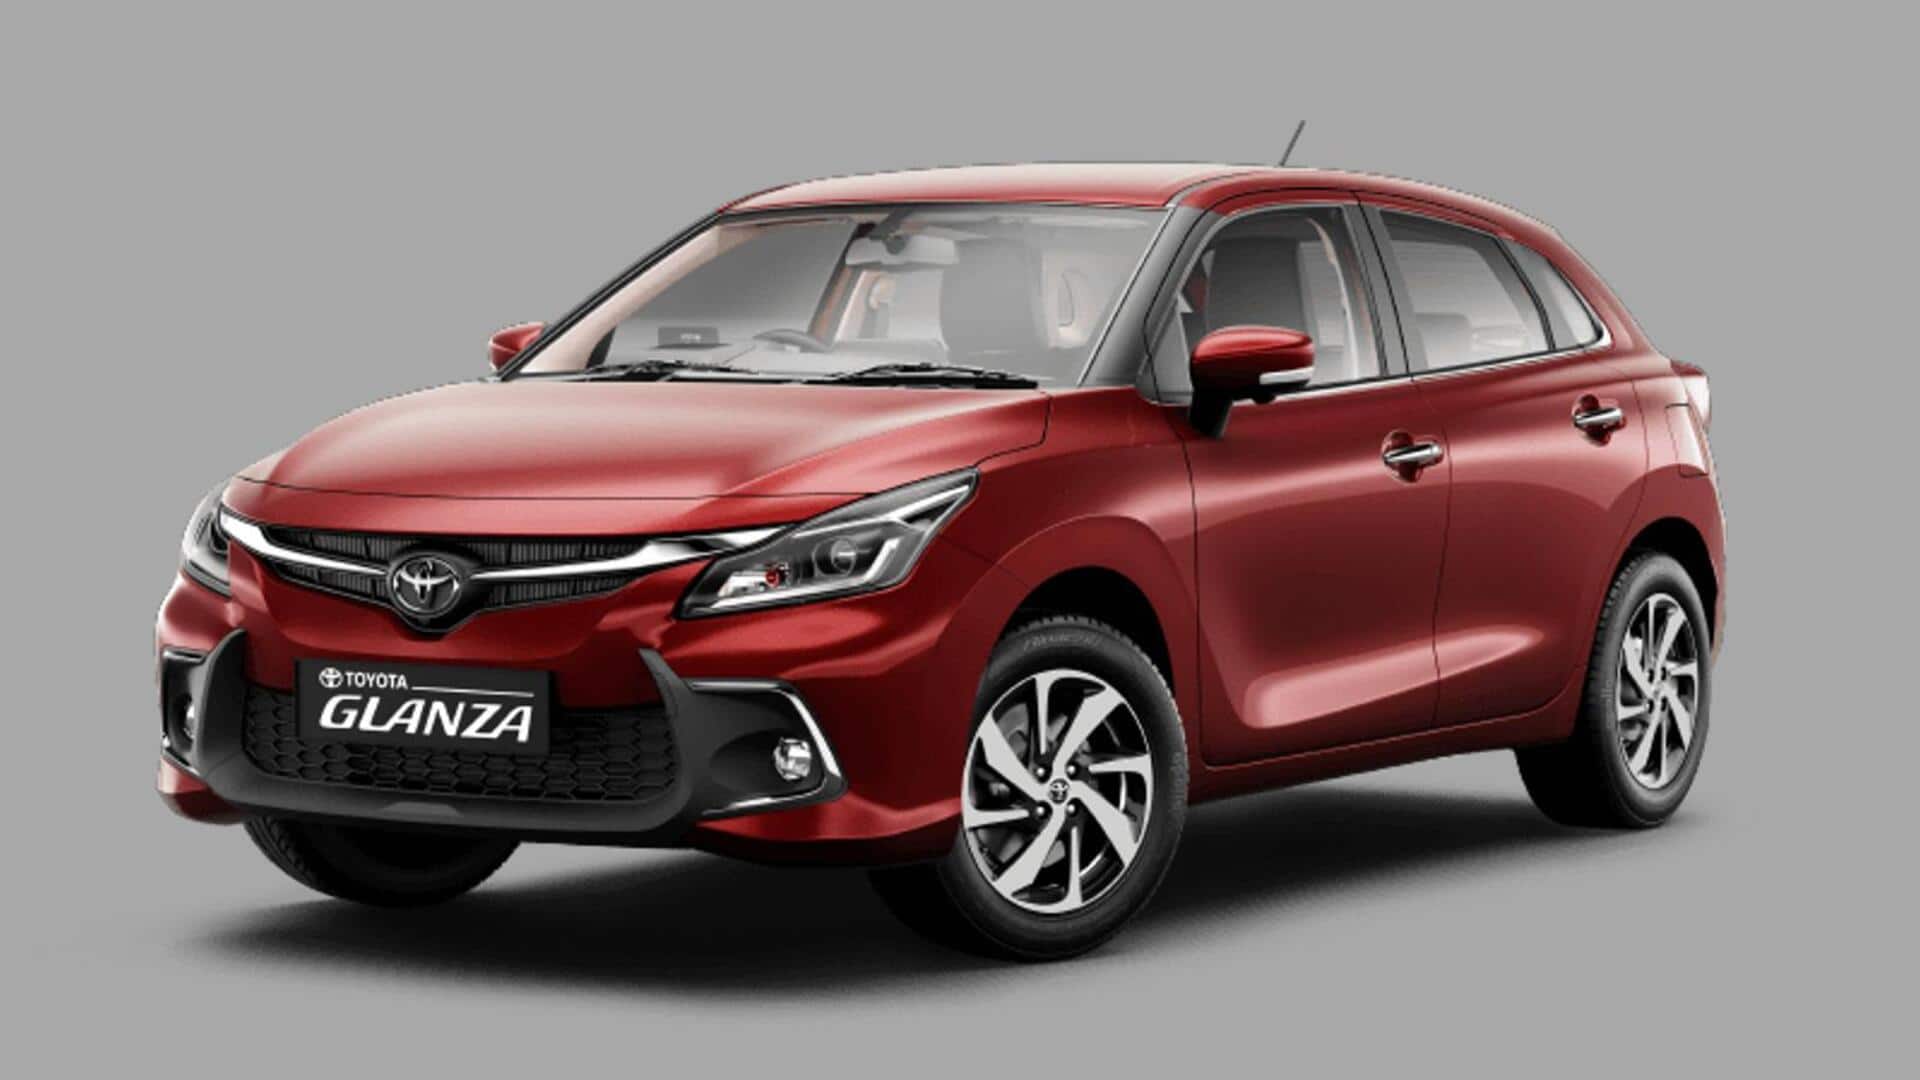 Now you have to wait less to own Toyota Glanza